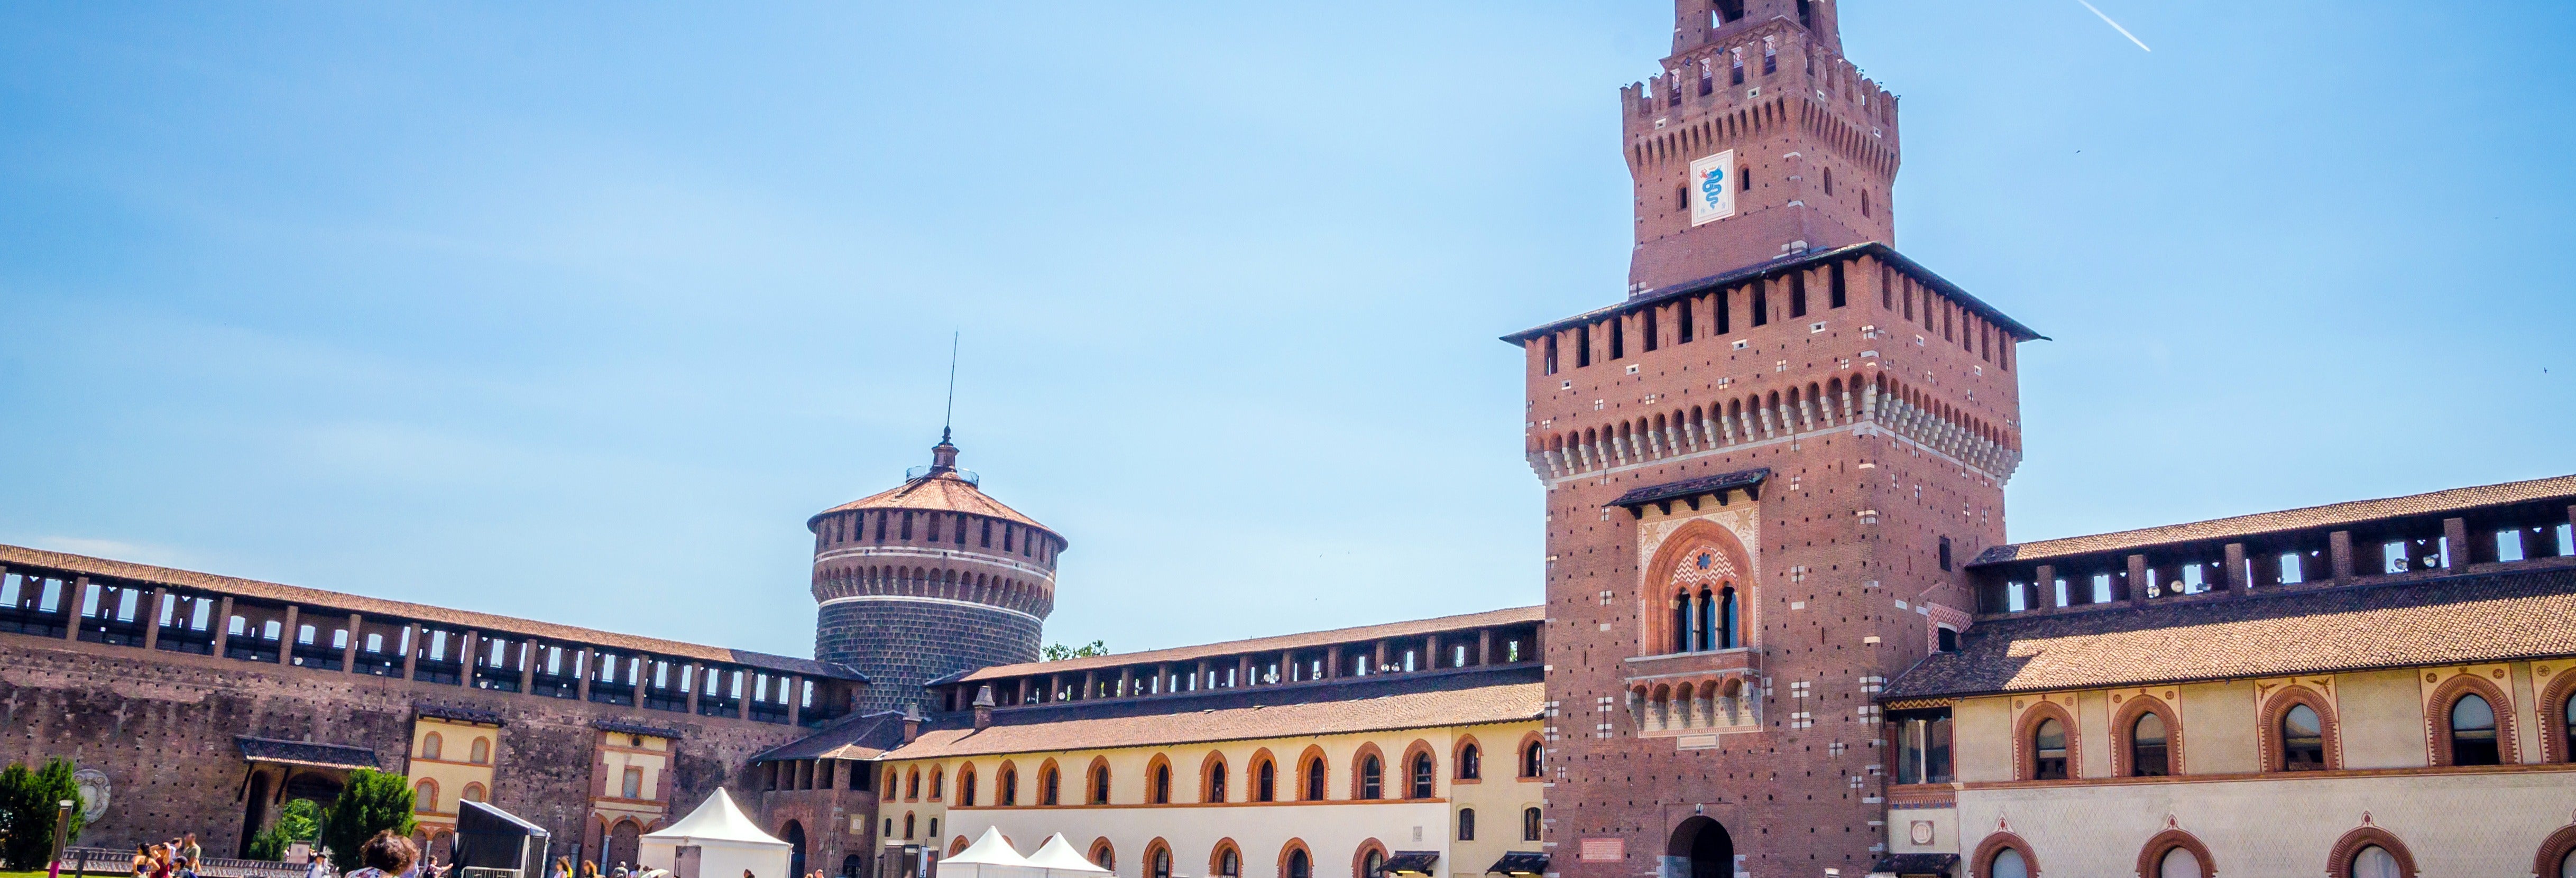 Guided Tour of Sforza Castle